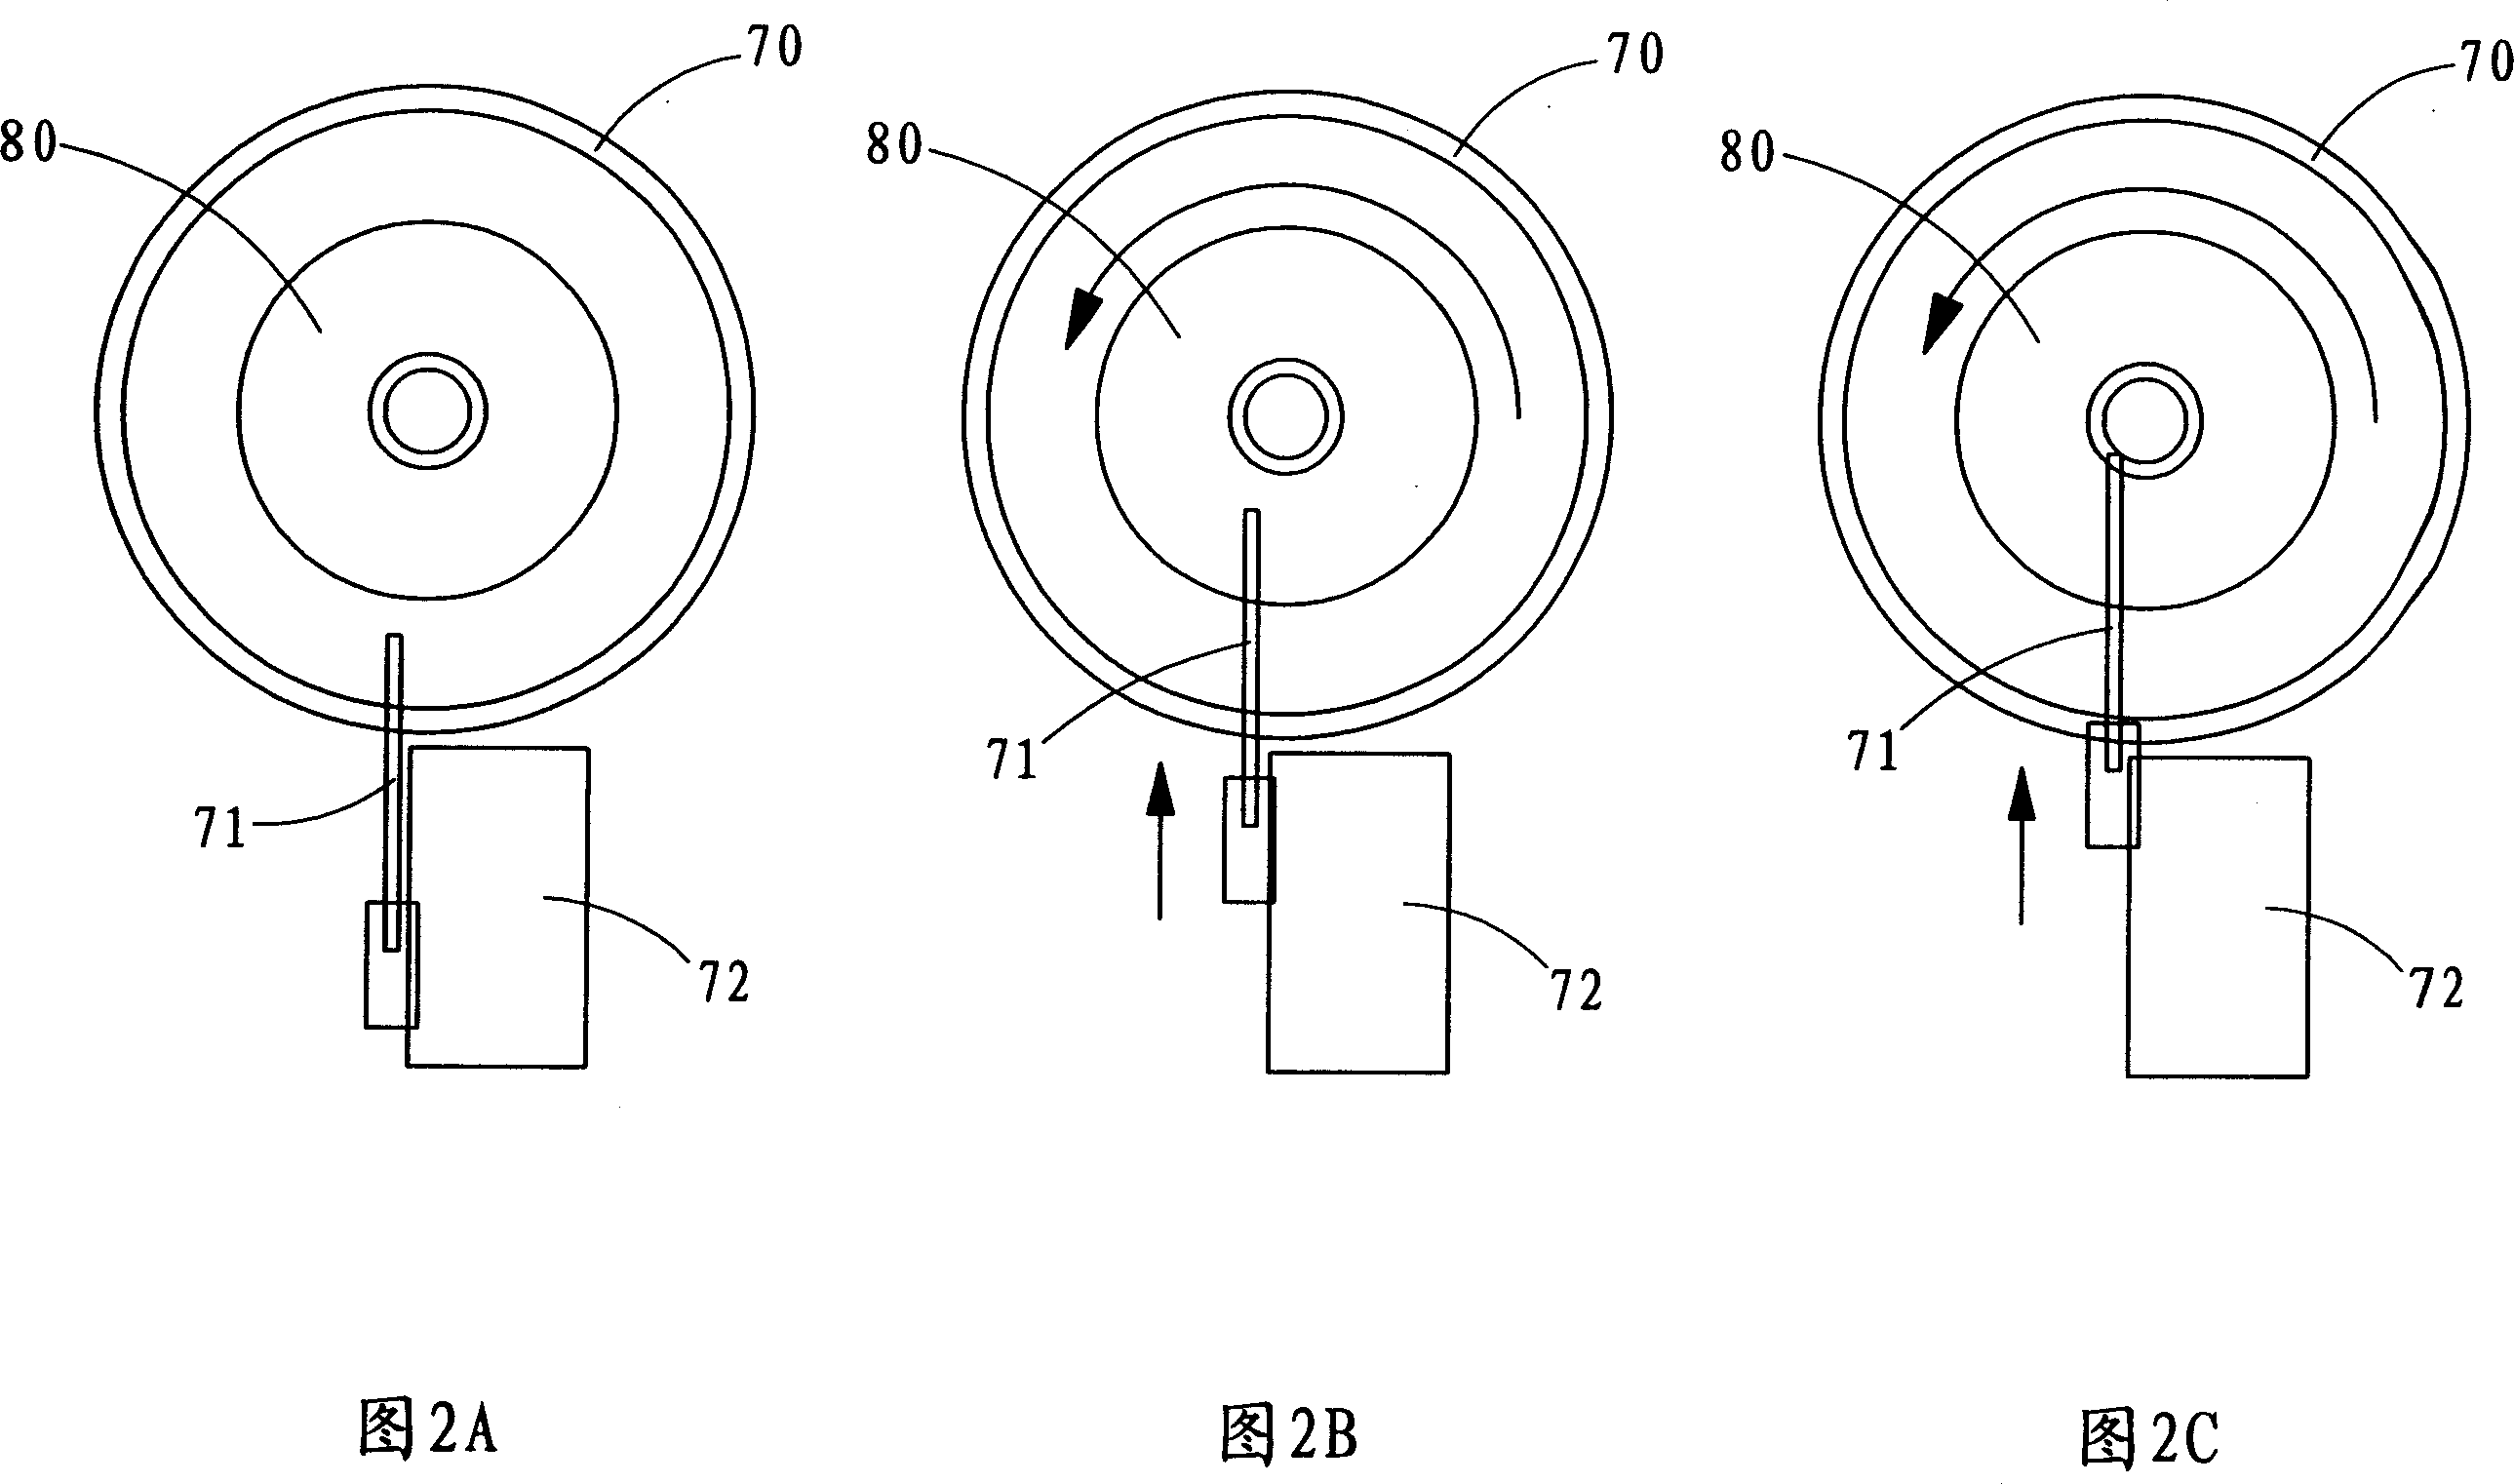 Optical disc washing procedure and apparatus